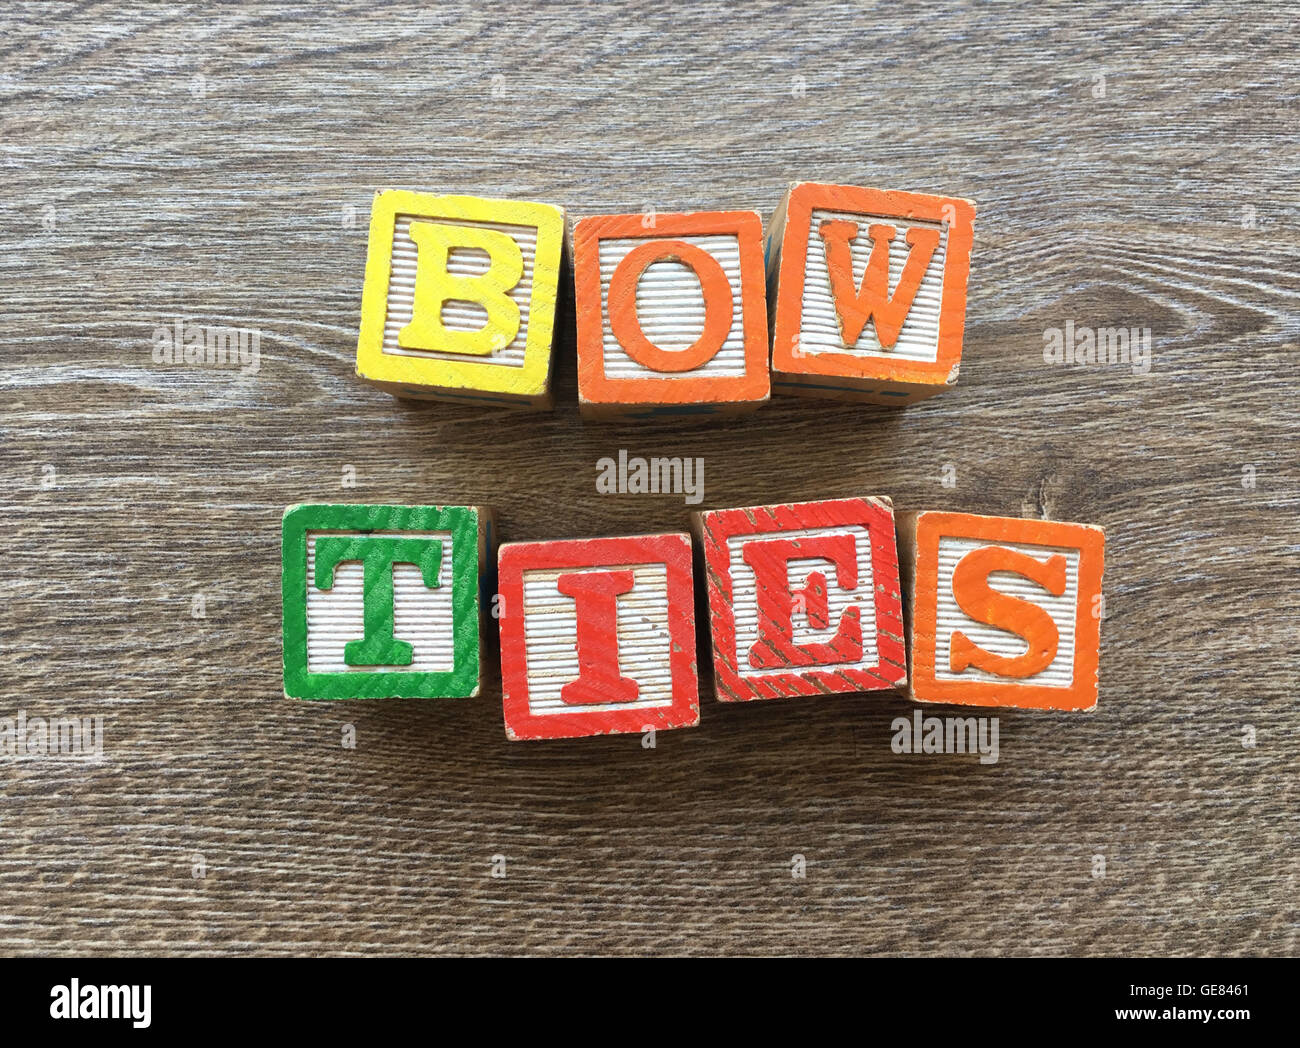 BOW TIES word written with wood block letter characters Stock Photo